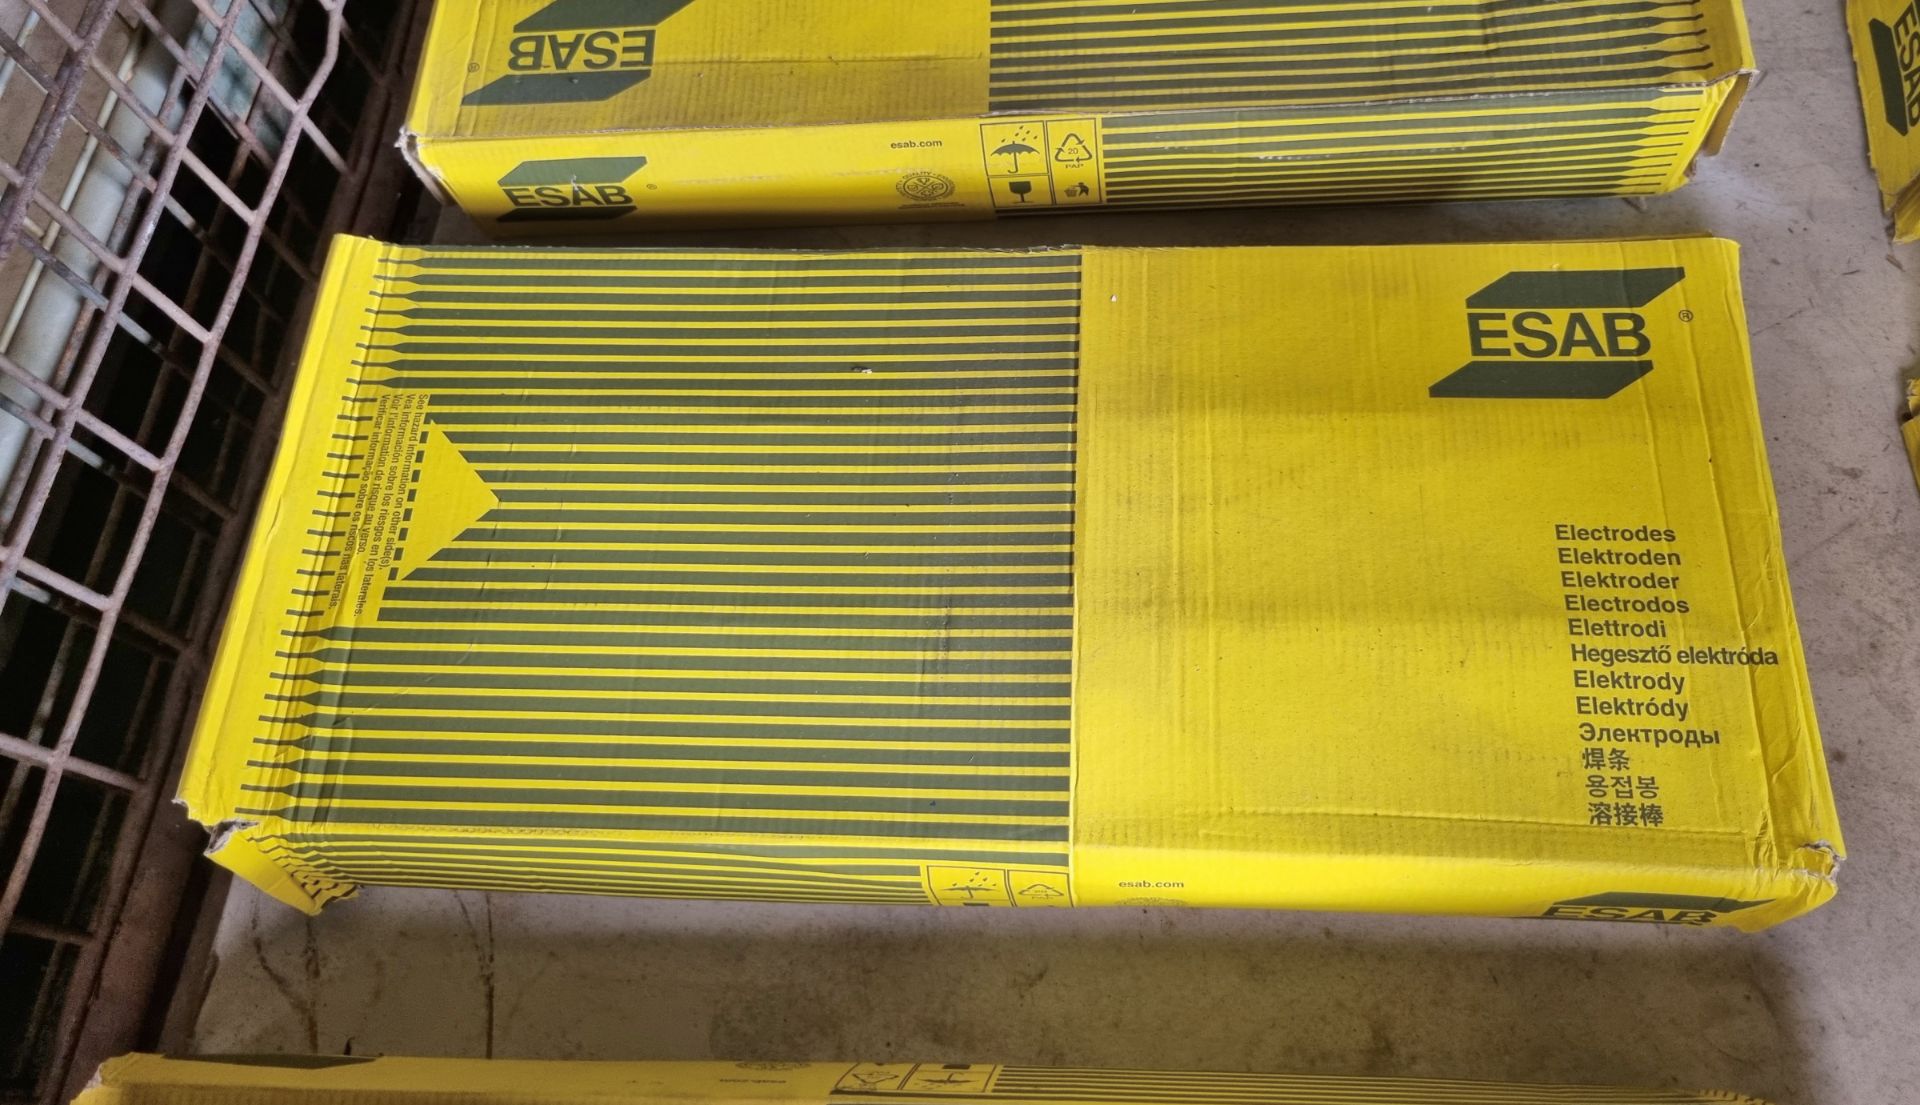 ESAB Welding rods - 4.0 x 450mm 21.3 kg - 6 boxes - Image 3 of 4